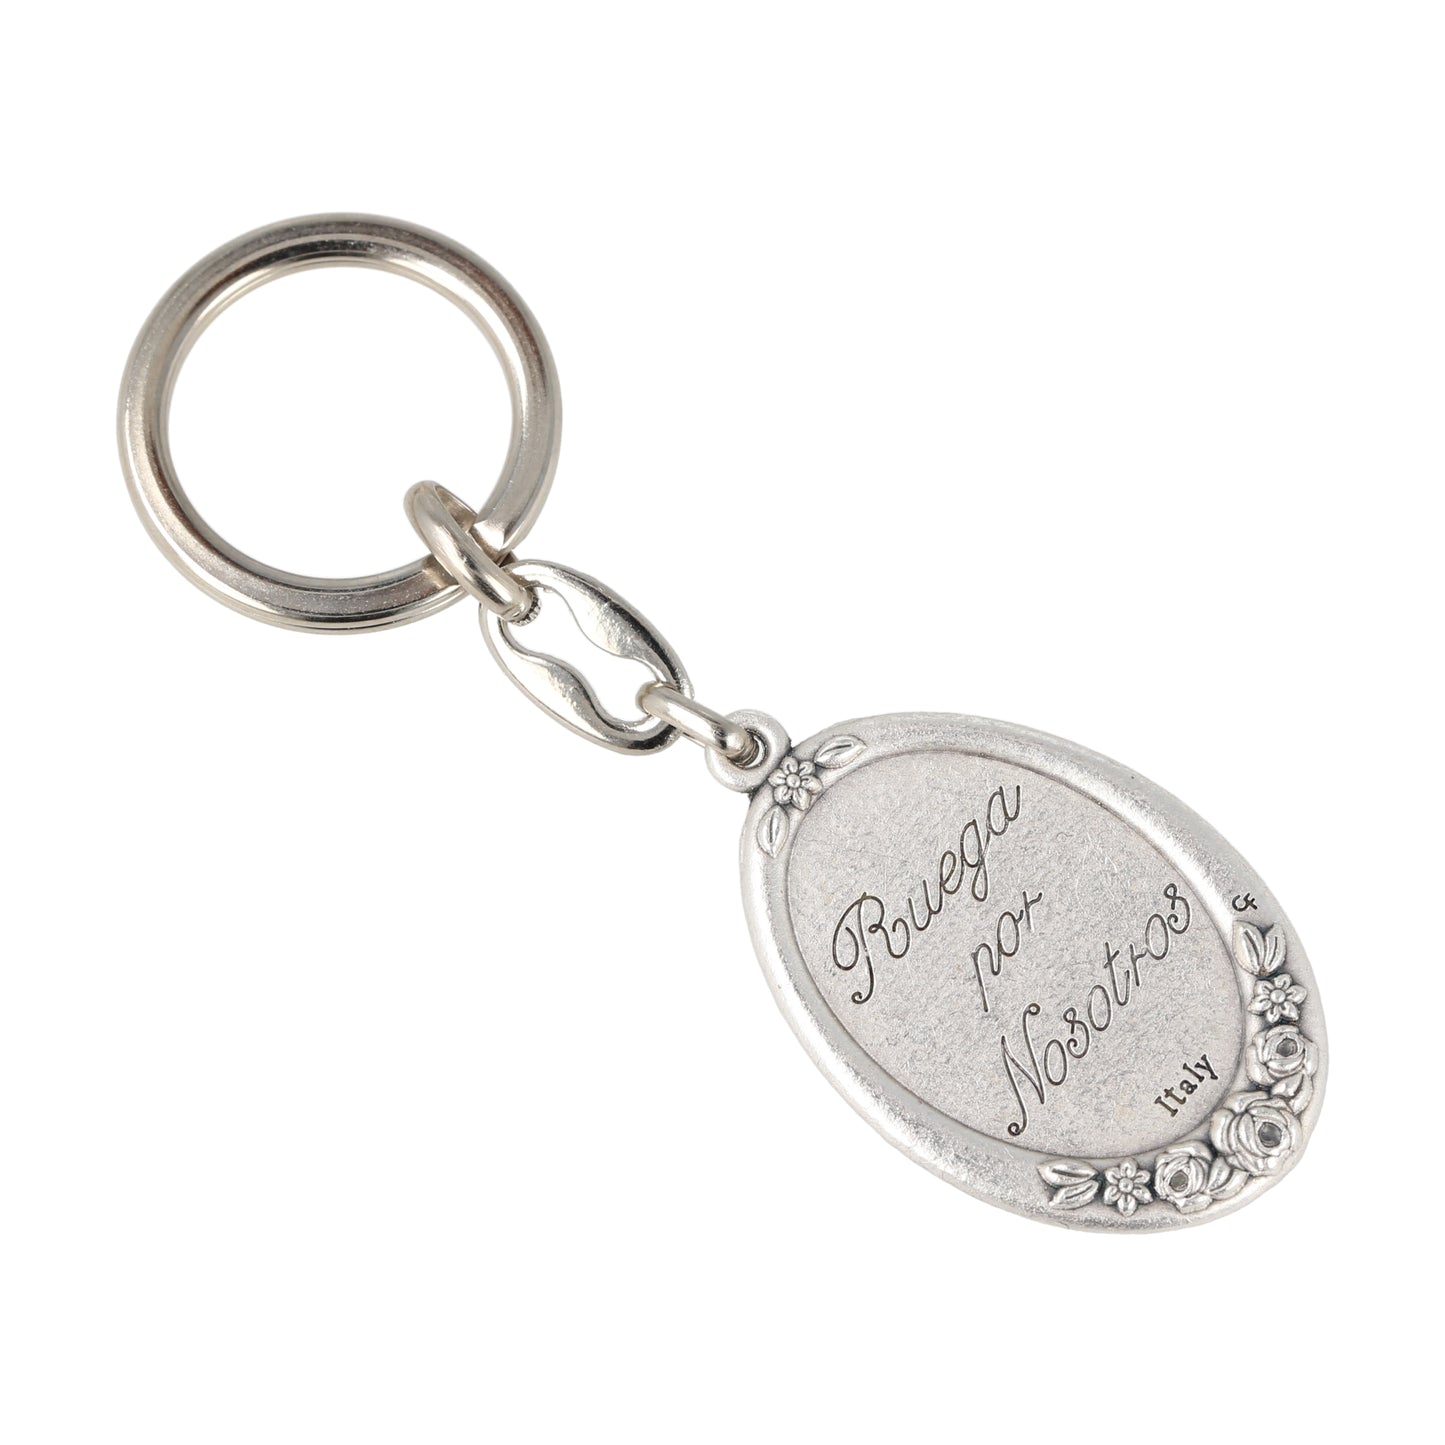 Keychain San Francisco Oval Silver With Flowers.  Souvenirs from Italy